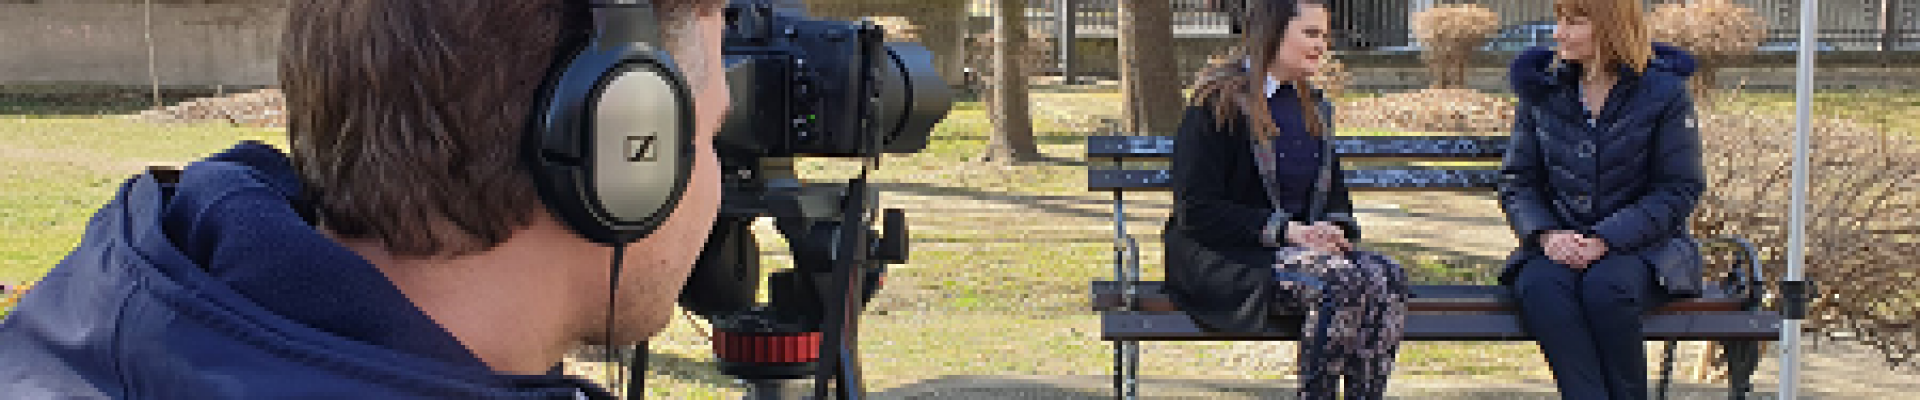 A person filming two people sitting on a bench